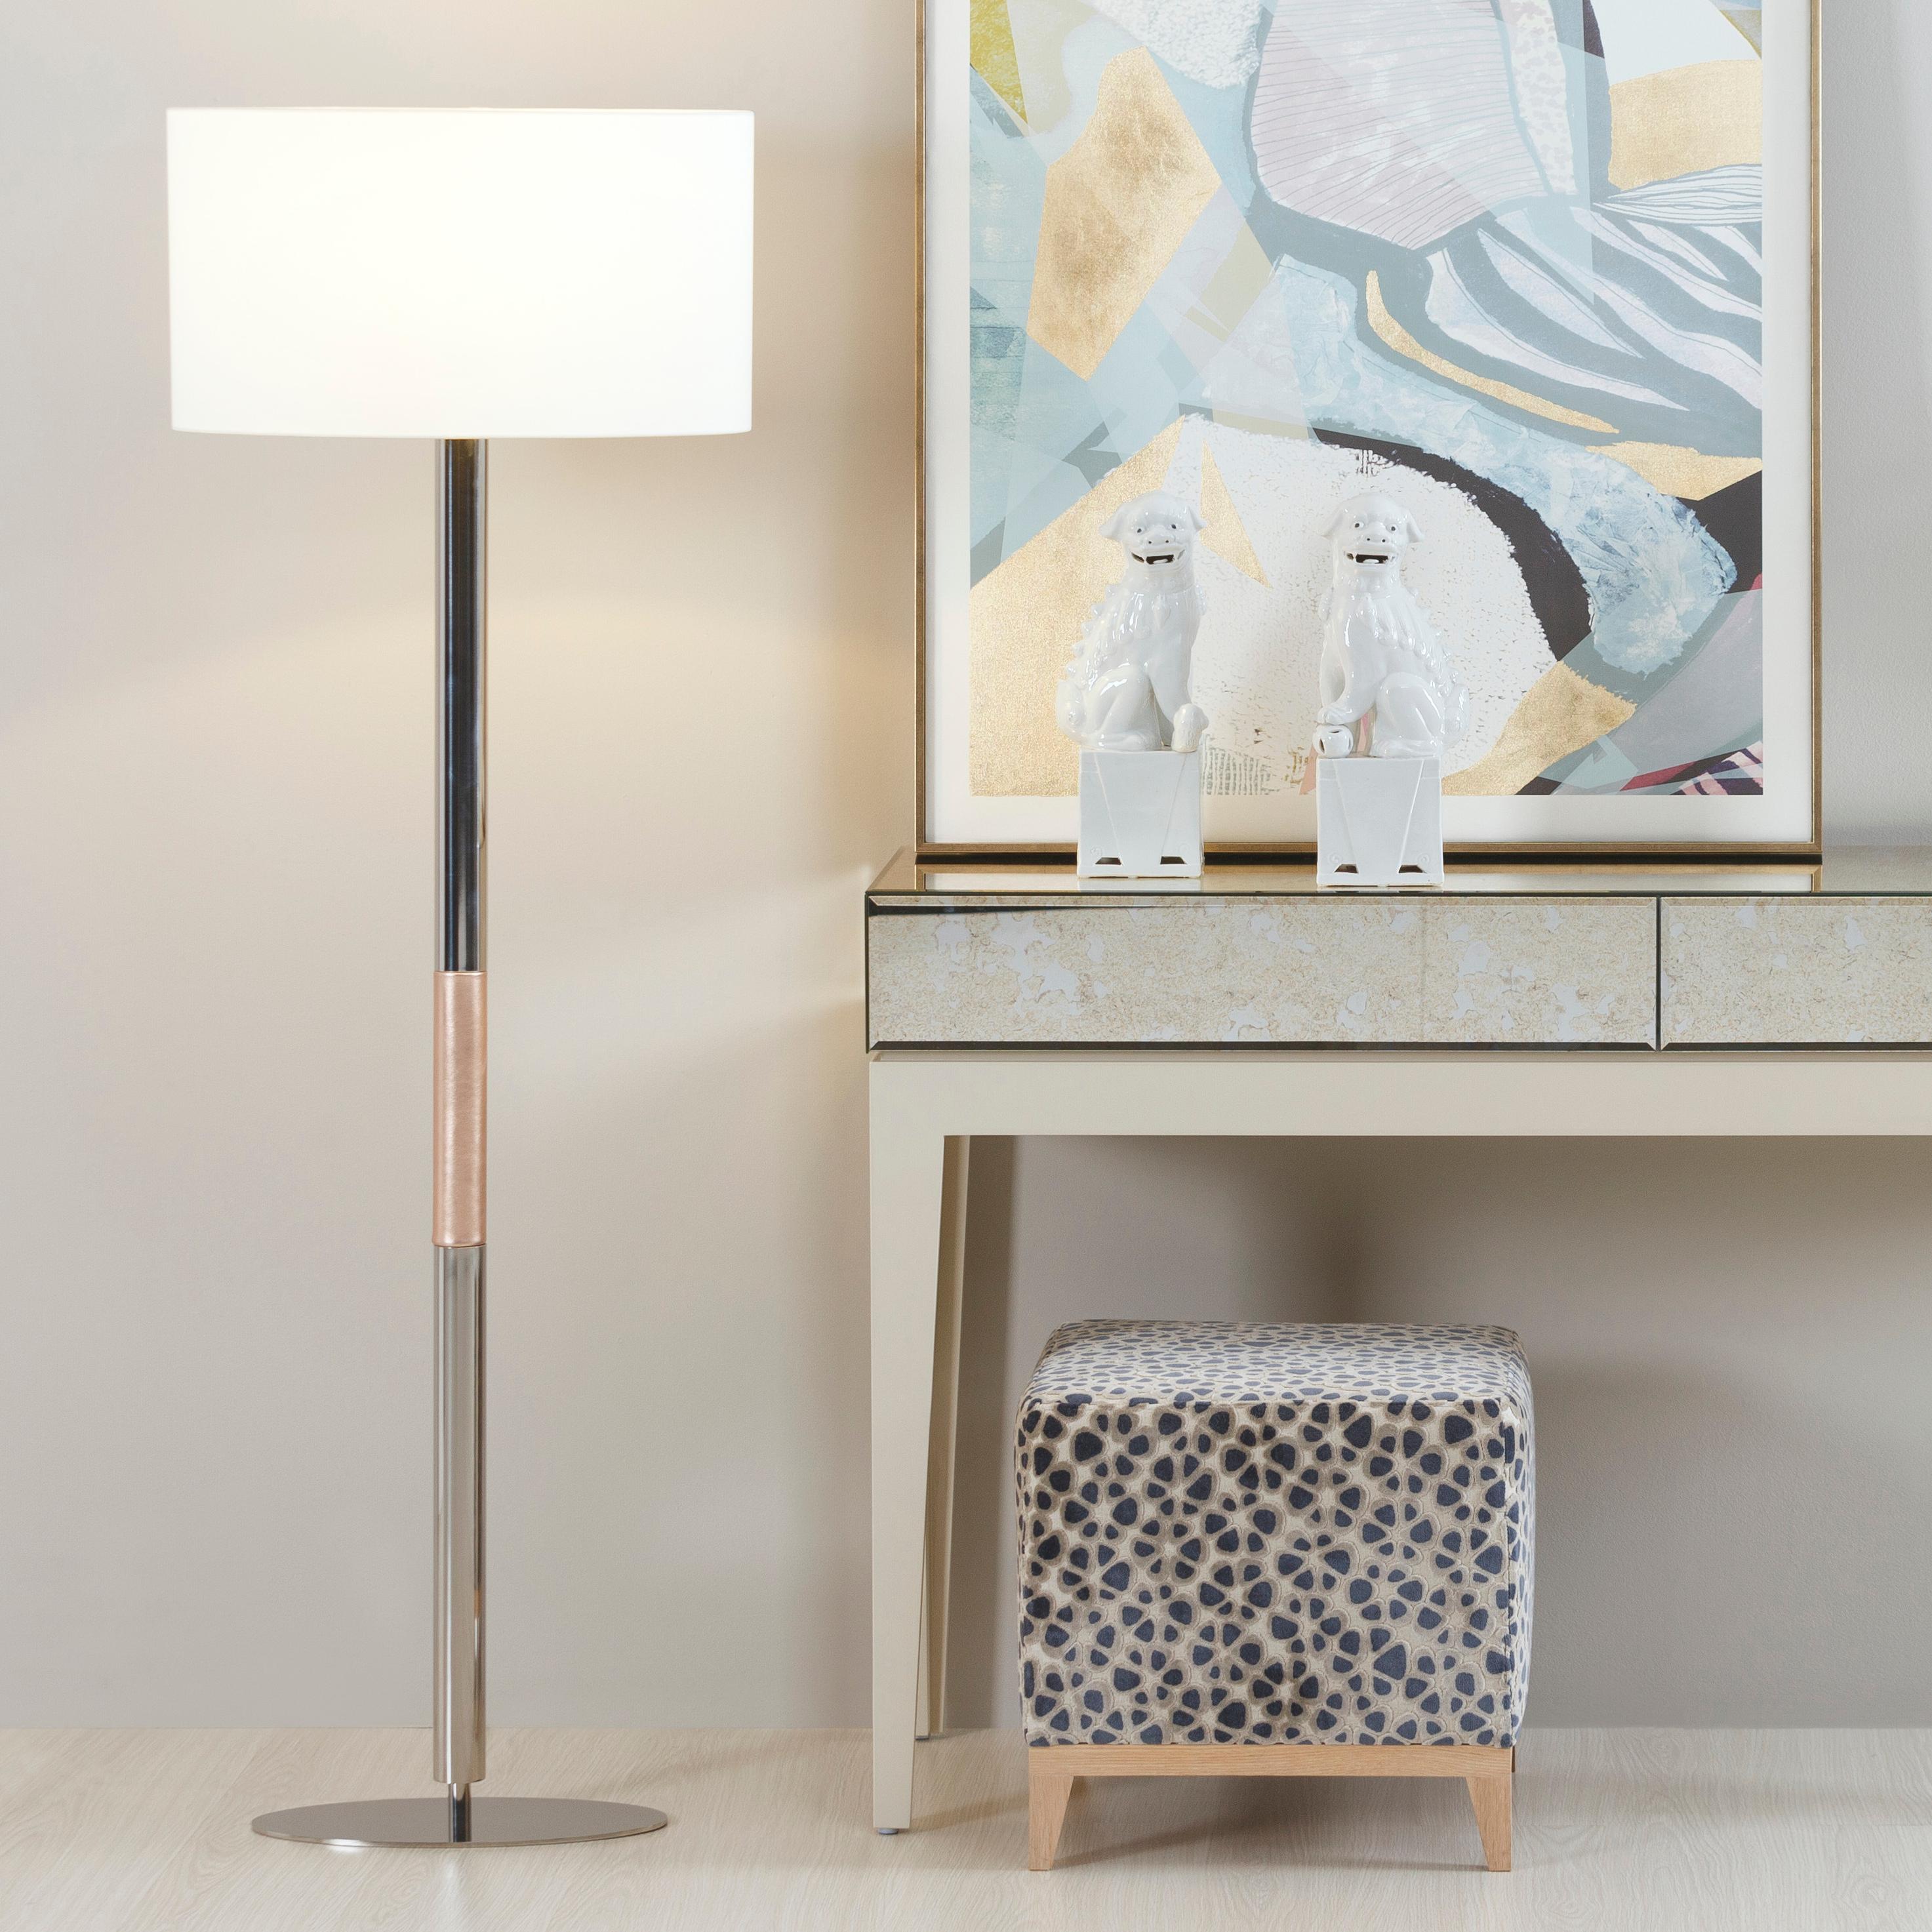 Gau Floor Lamp, Modern Collection, Handcrafted in Portugal - Europe by GF Modern.

The luxurious floor lamp Gau creates a subliminal ambience for extraordinary living. The inlay detail in pink leather harmonizes with the wonderful contrast between